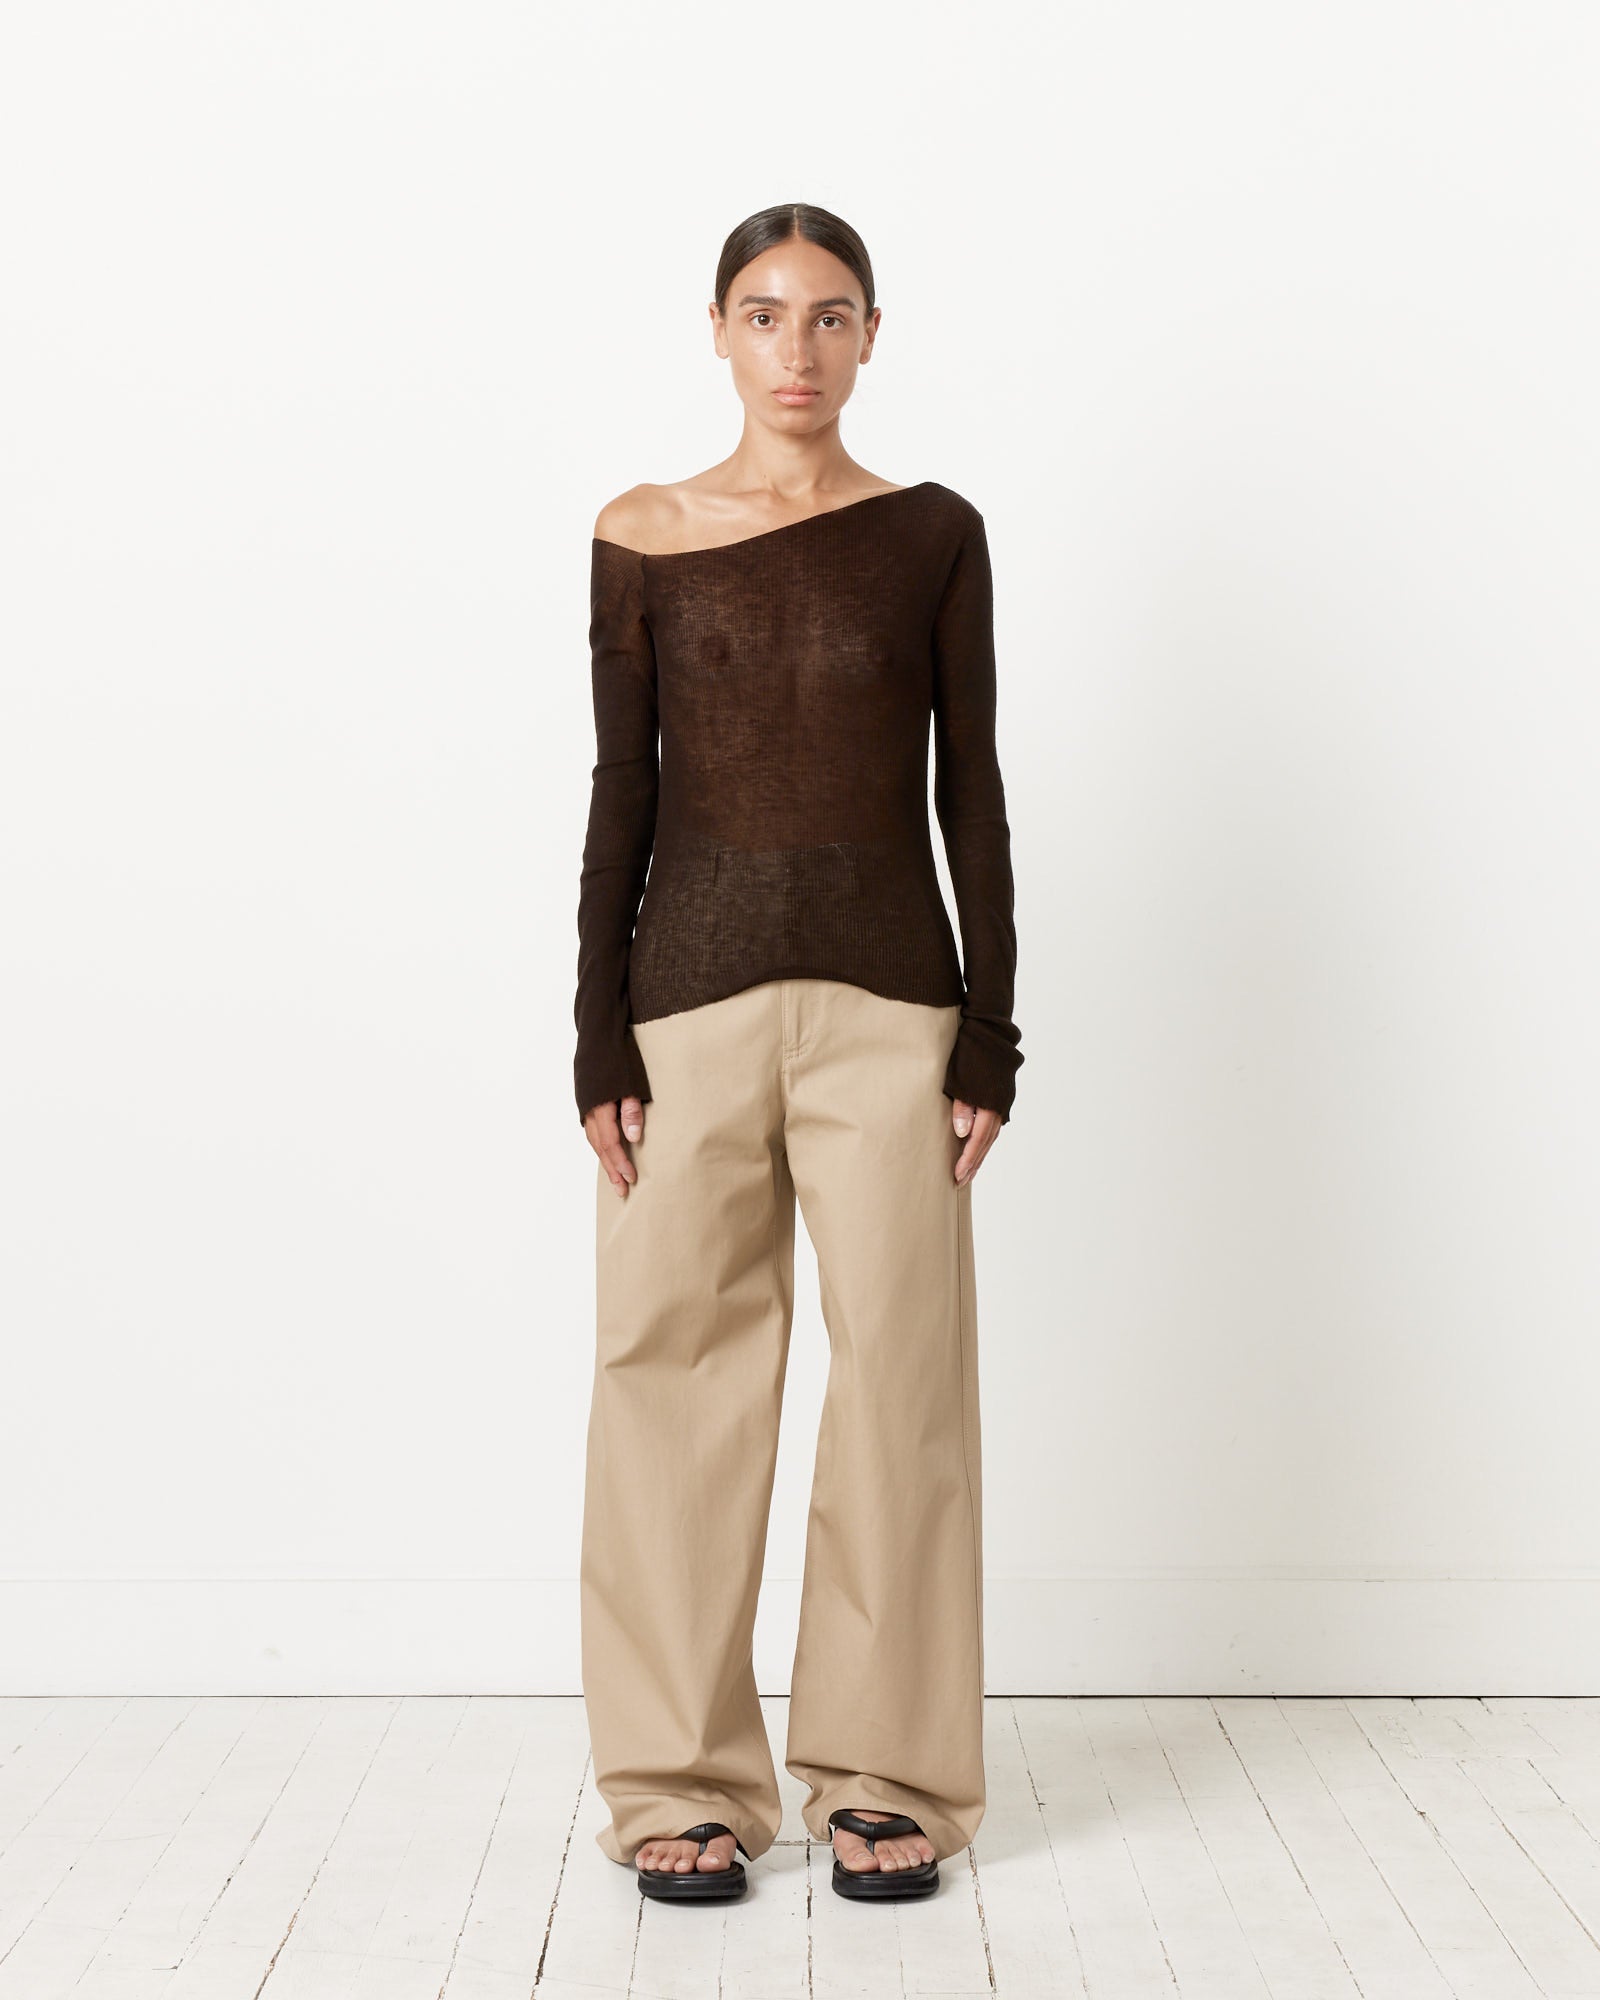 Yucca Top in Brown